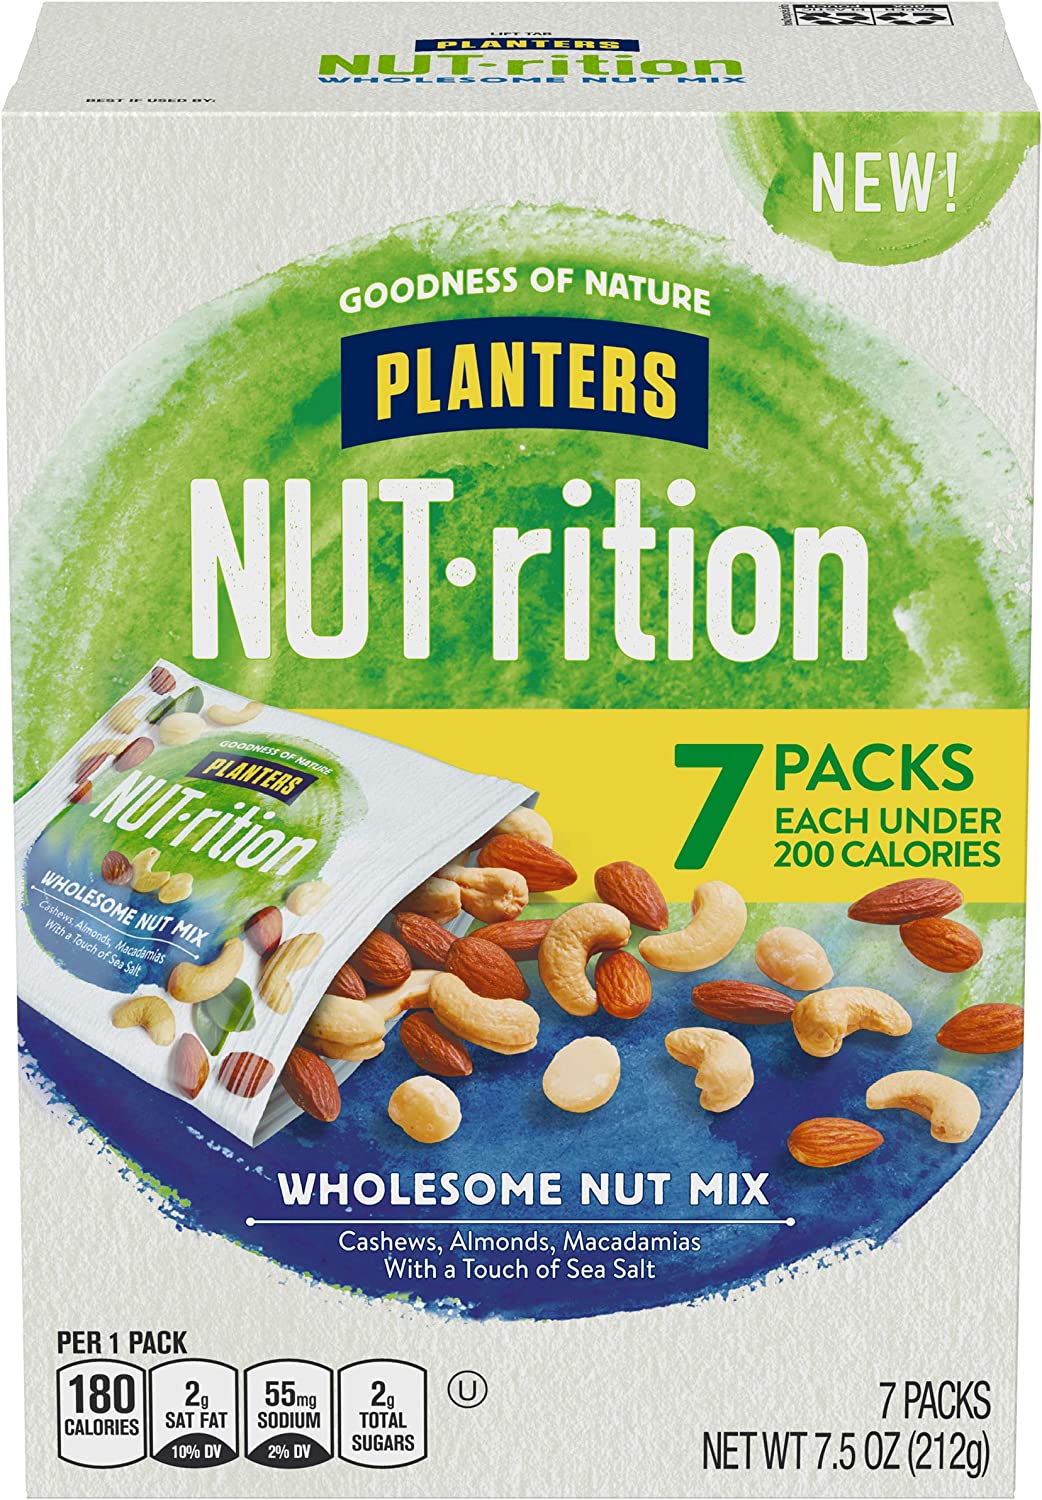 7.5-Oz Planters NUT-rition Wholesome Nut Mix $4.18 w/ S&S + Free Shipping w/ Prime or on orders over $25